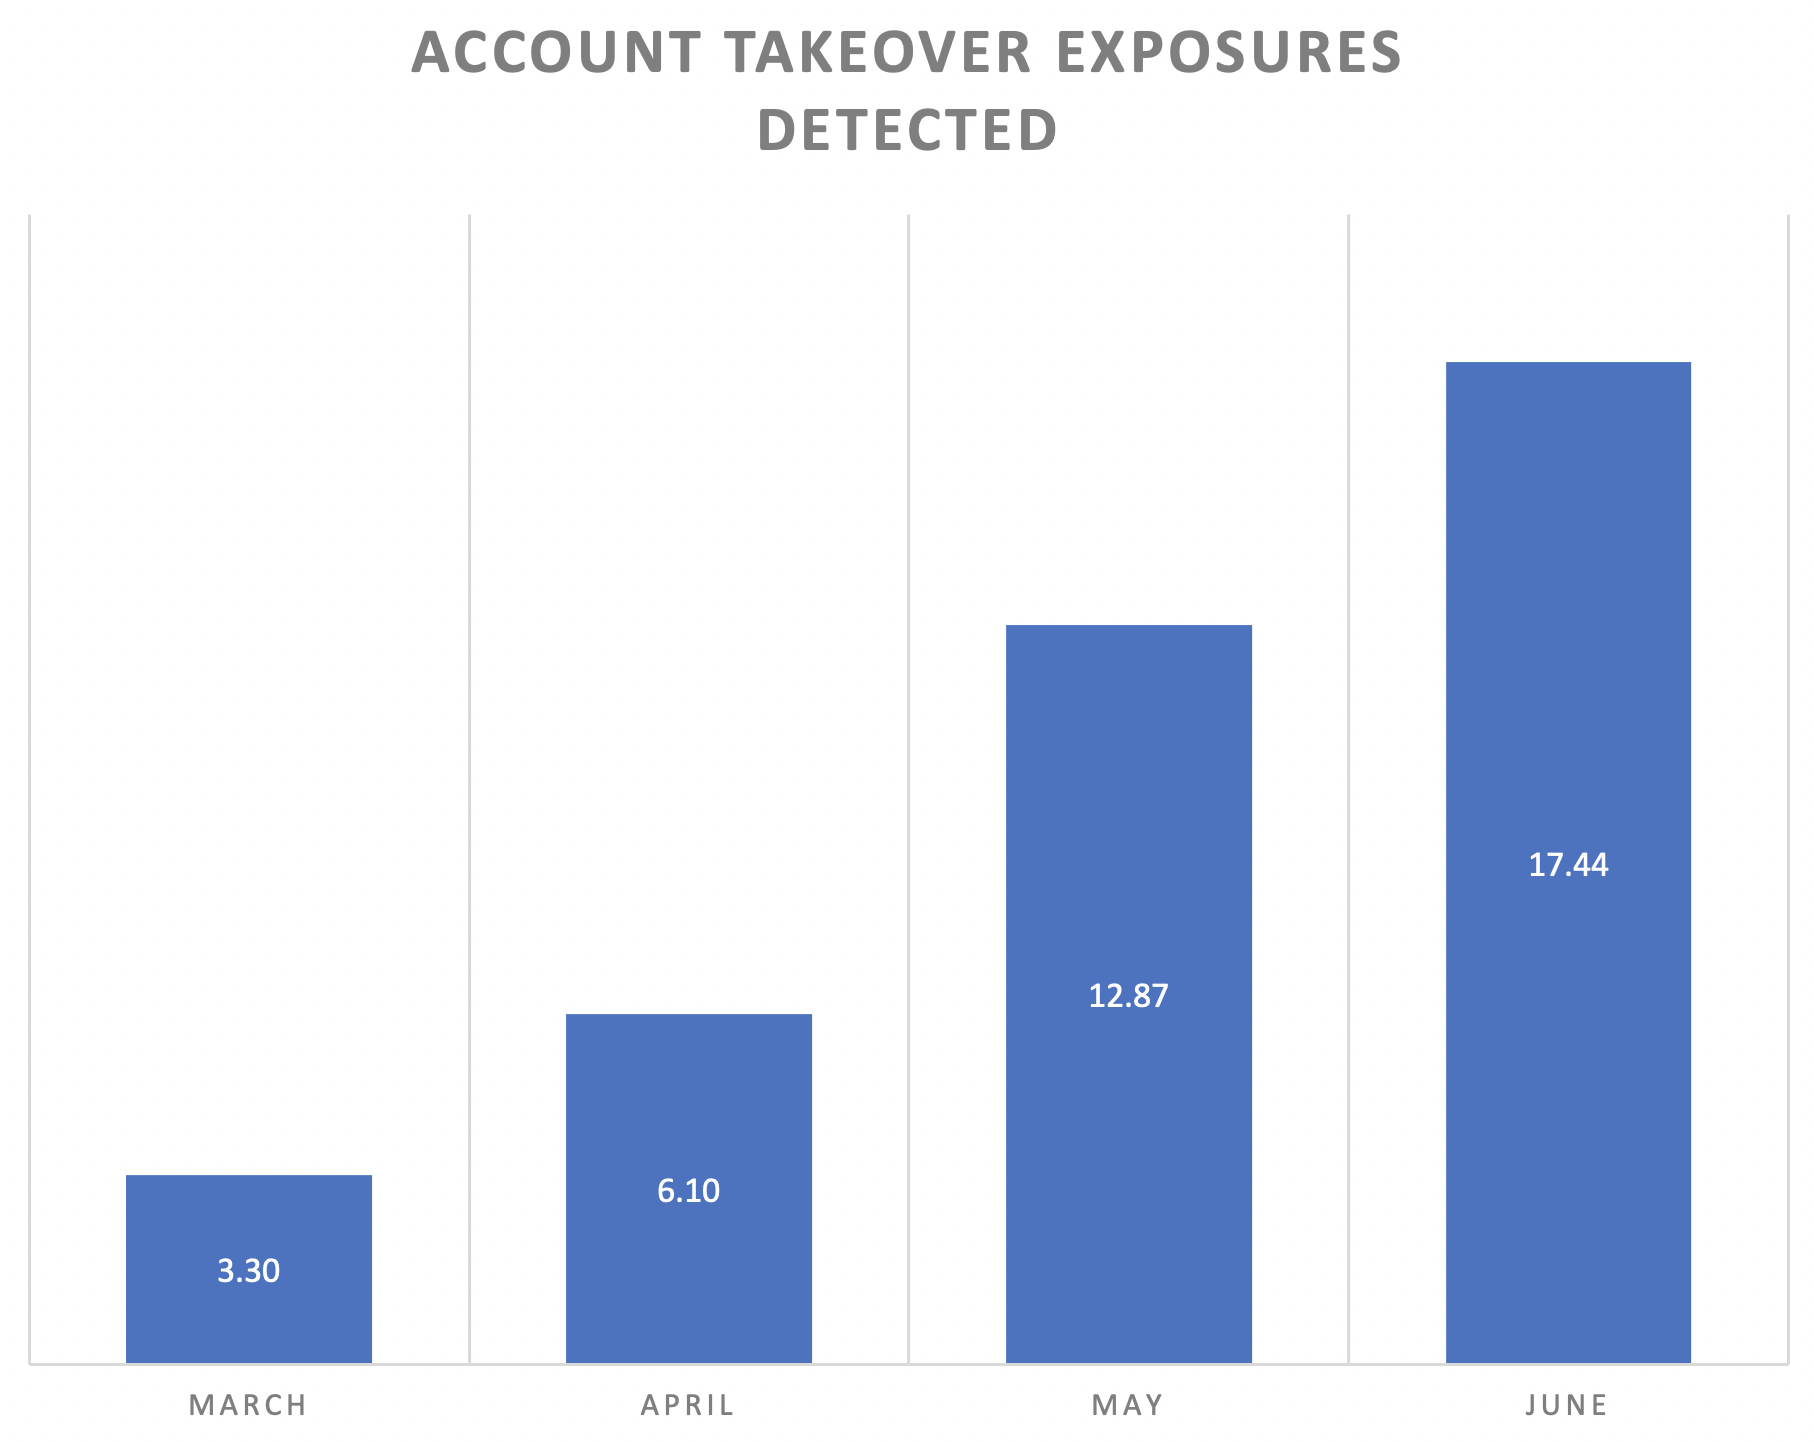 Account Takeover Exposures Detected Bar Graph goes from 3.3 to 17.44 from March to June